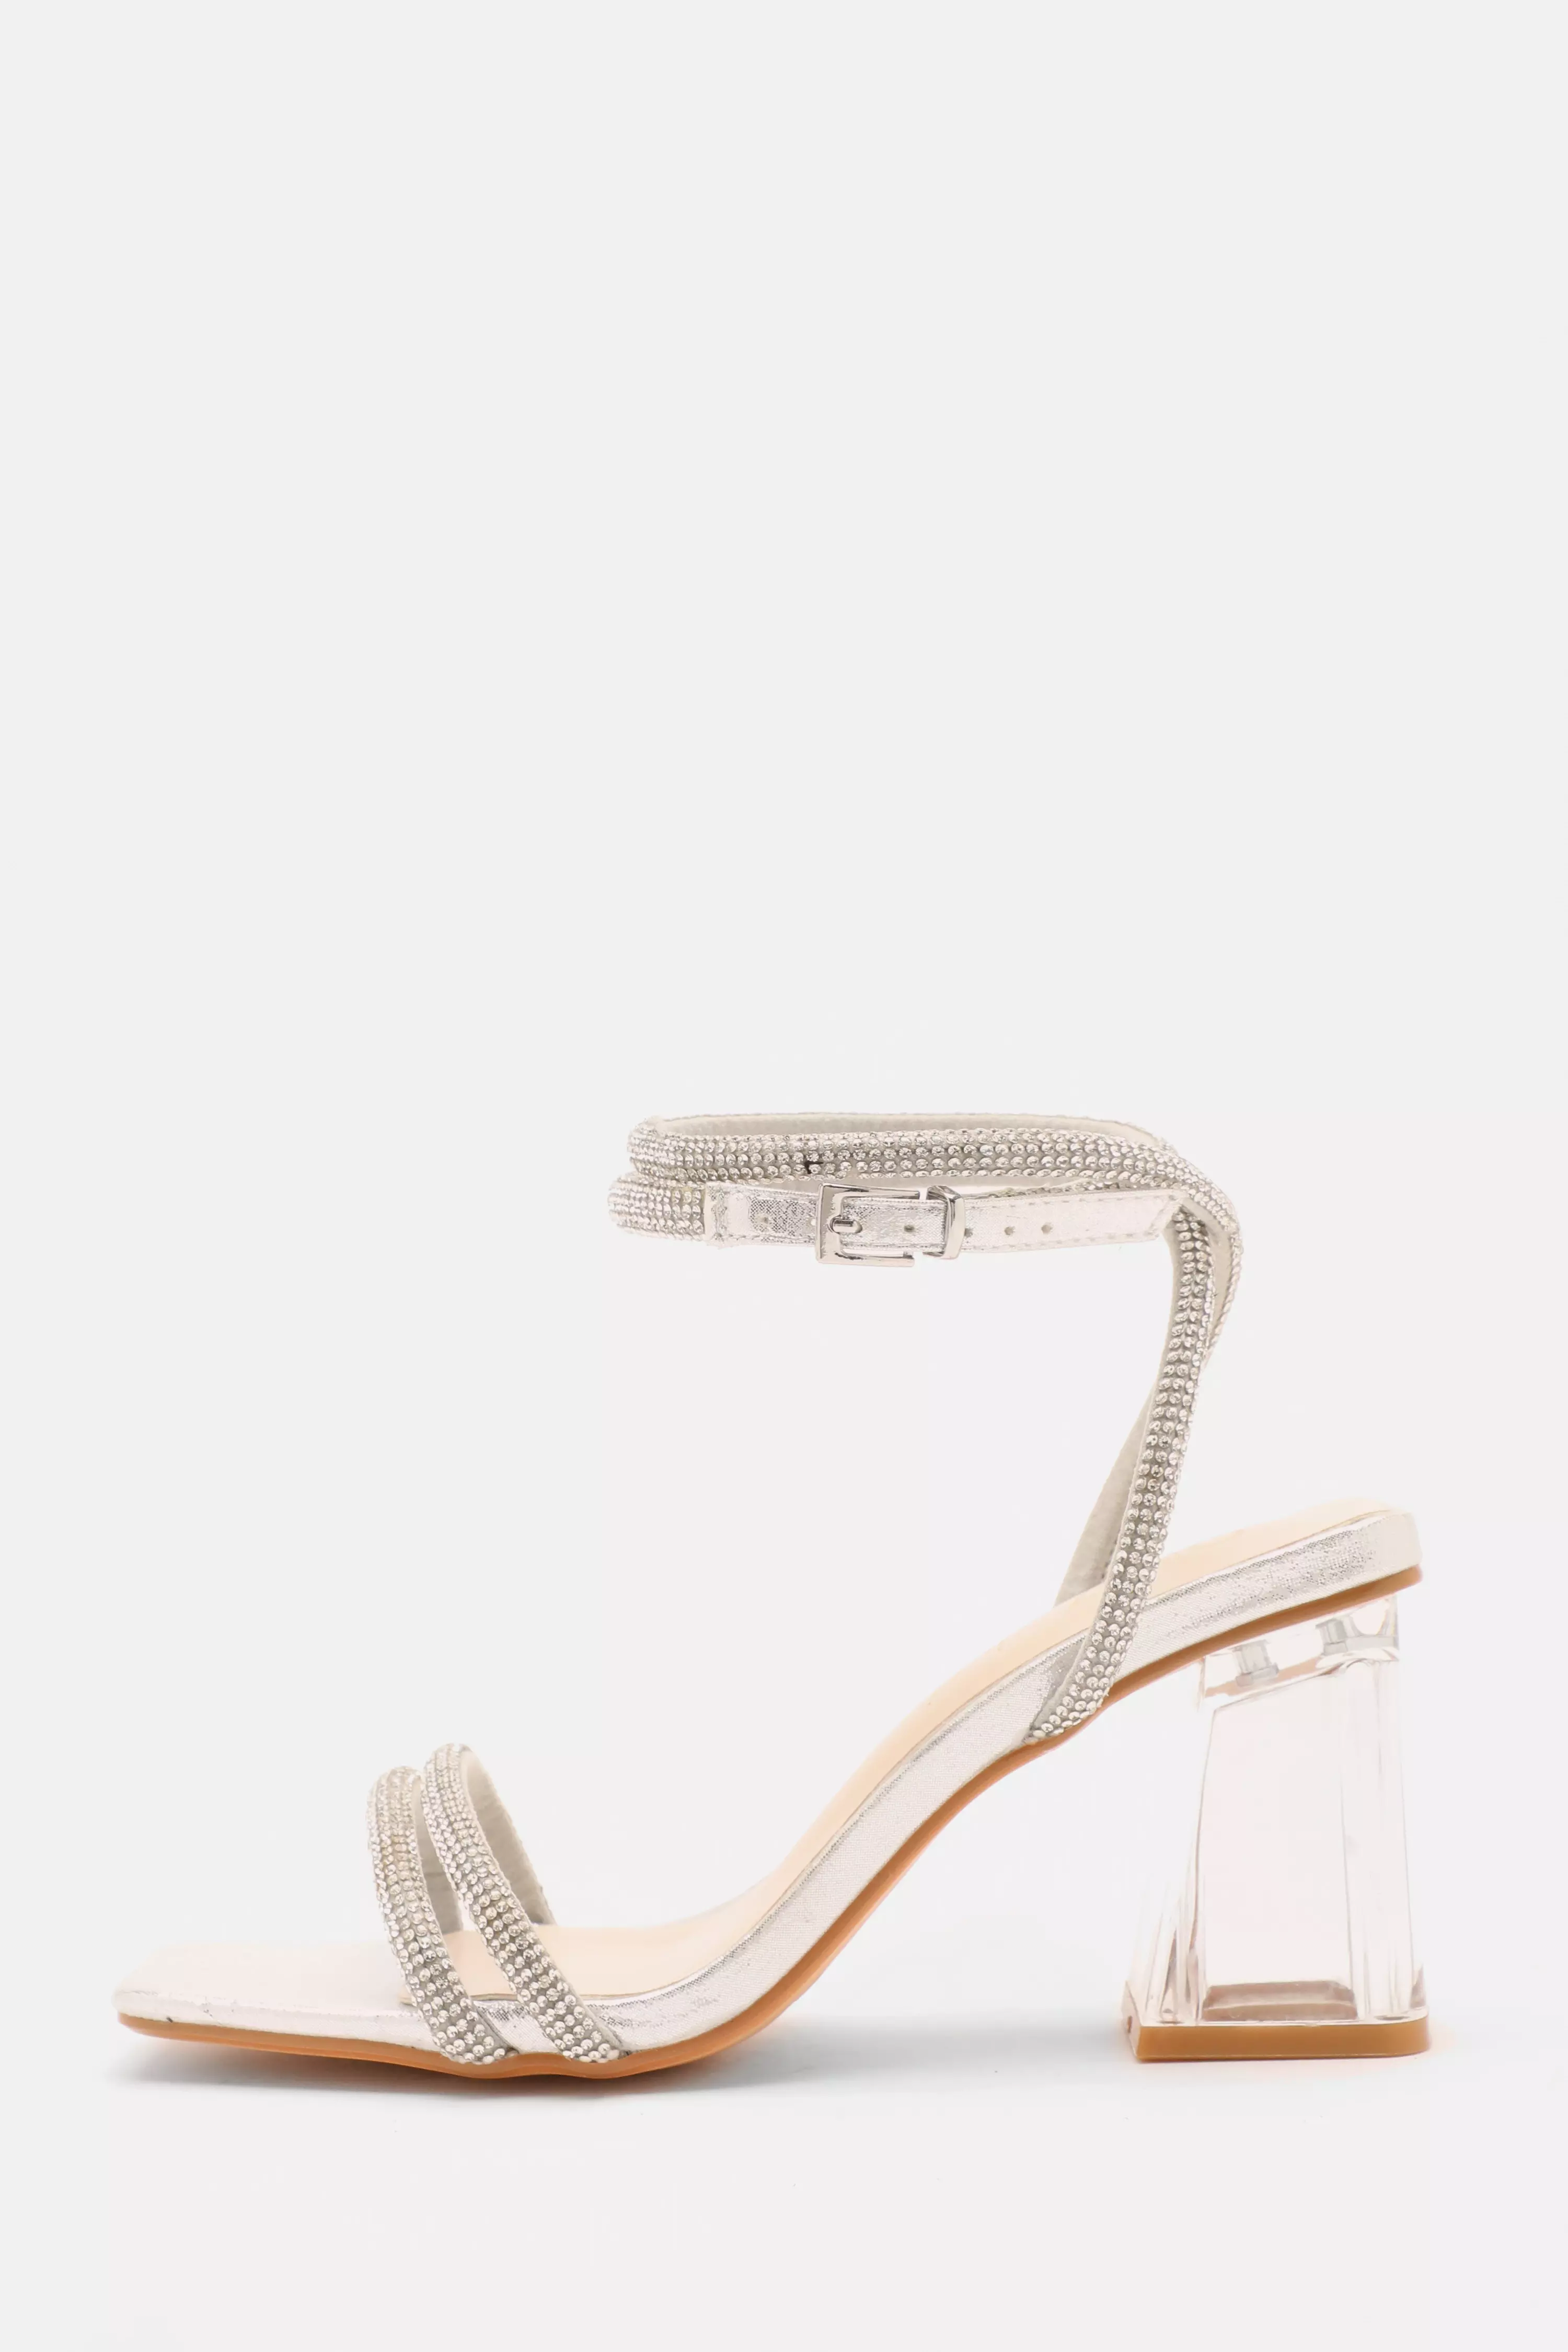 Wide Fit Silver Diamante Clear Block Heeled Sandals - QUIZ Clothing